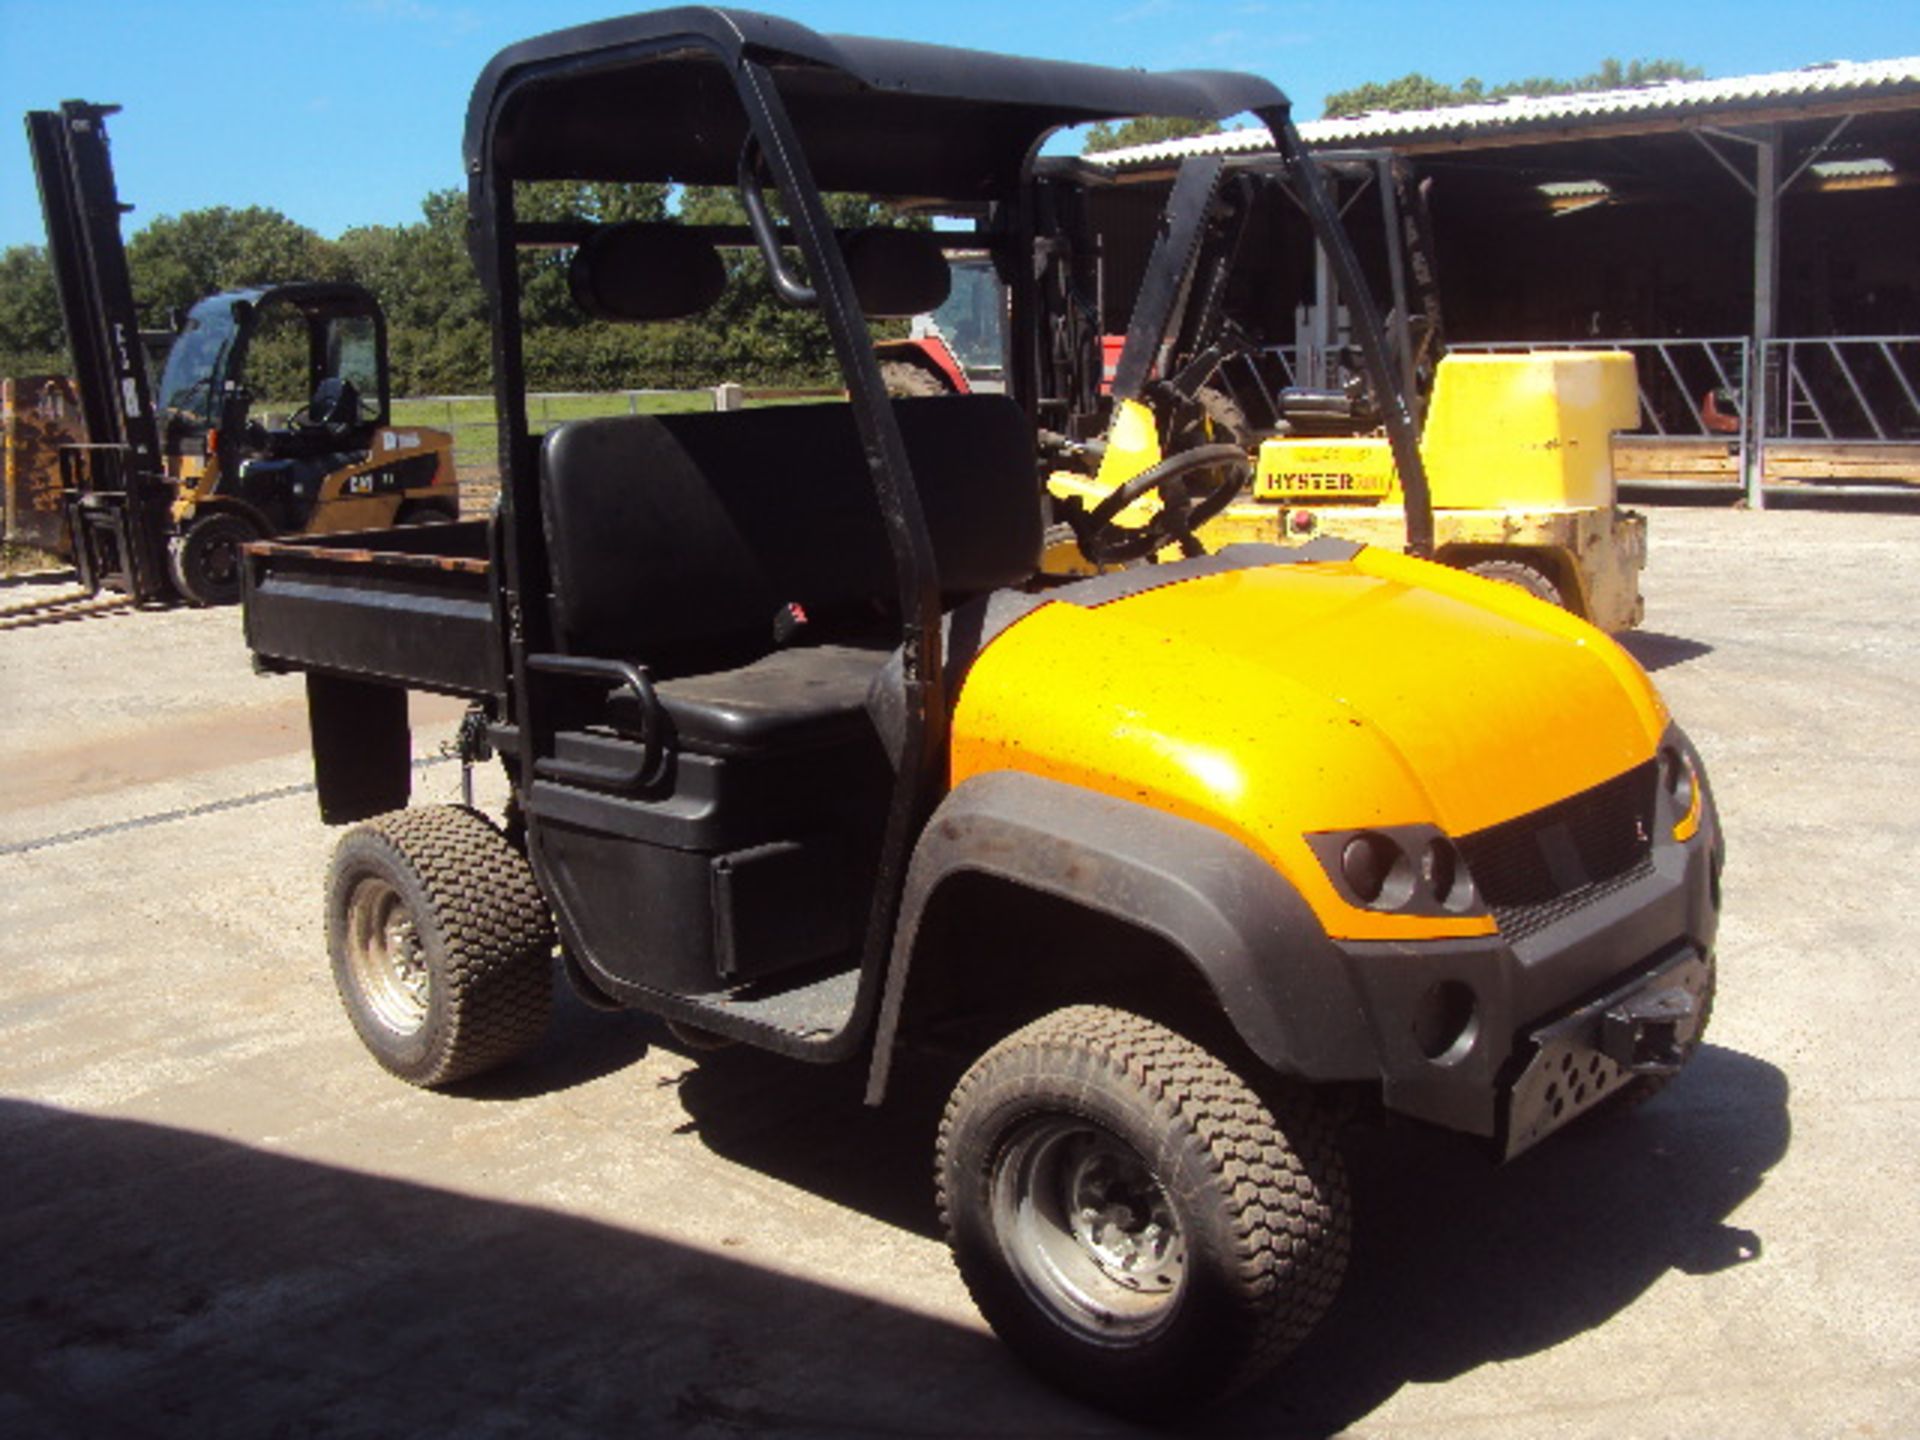 2012 JCB WORKMAX 4x4 diesel driven utility tipper S/n: E01630030 (223 recorded hours) with manual - Image 4 of 6